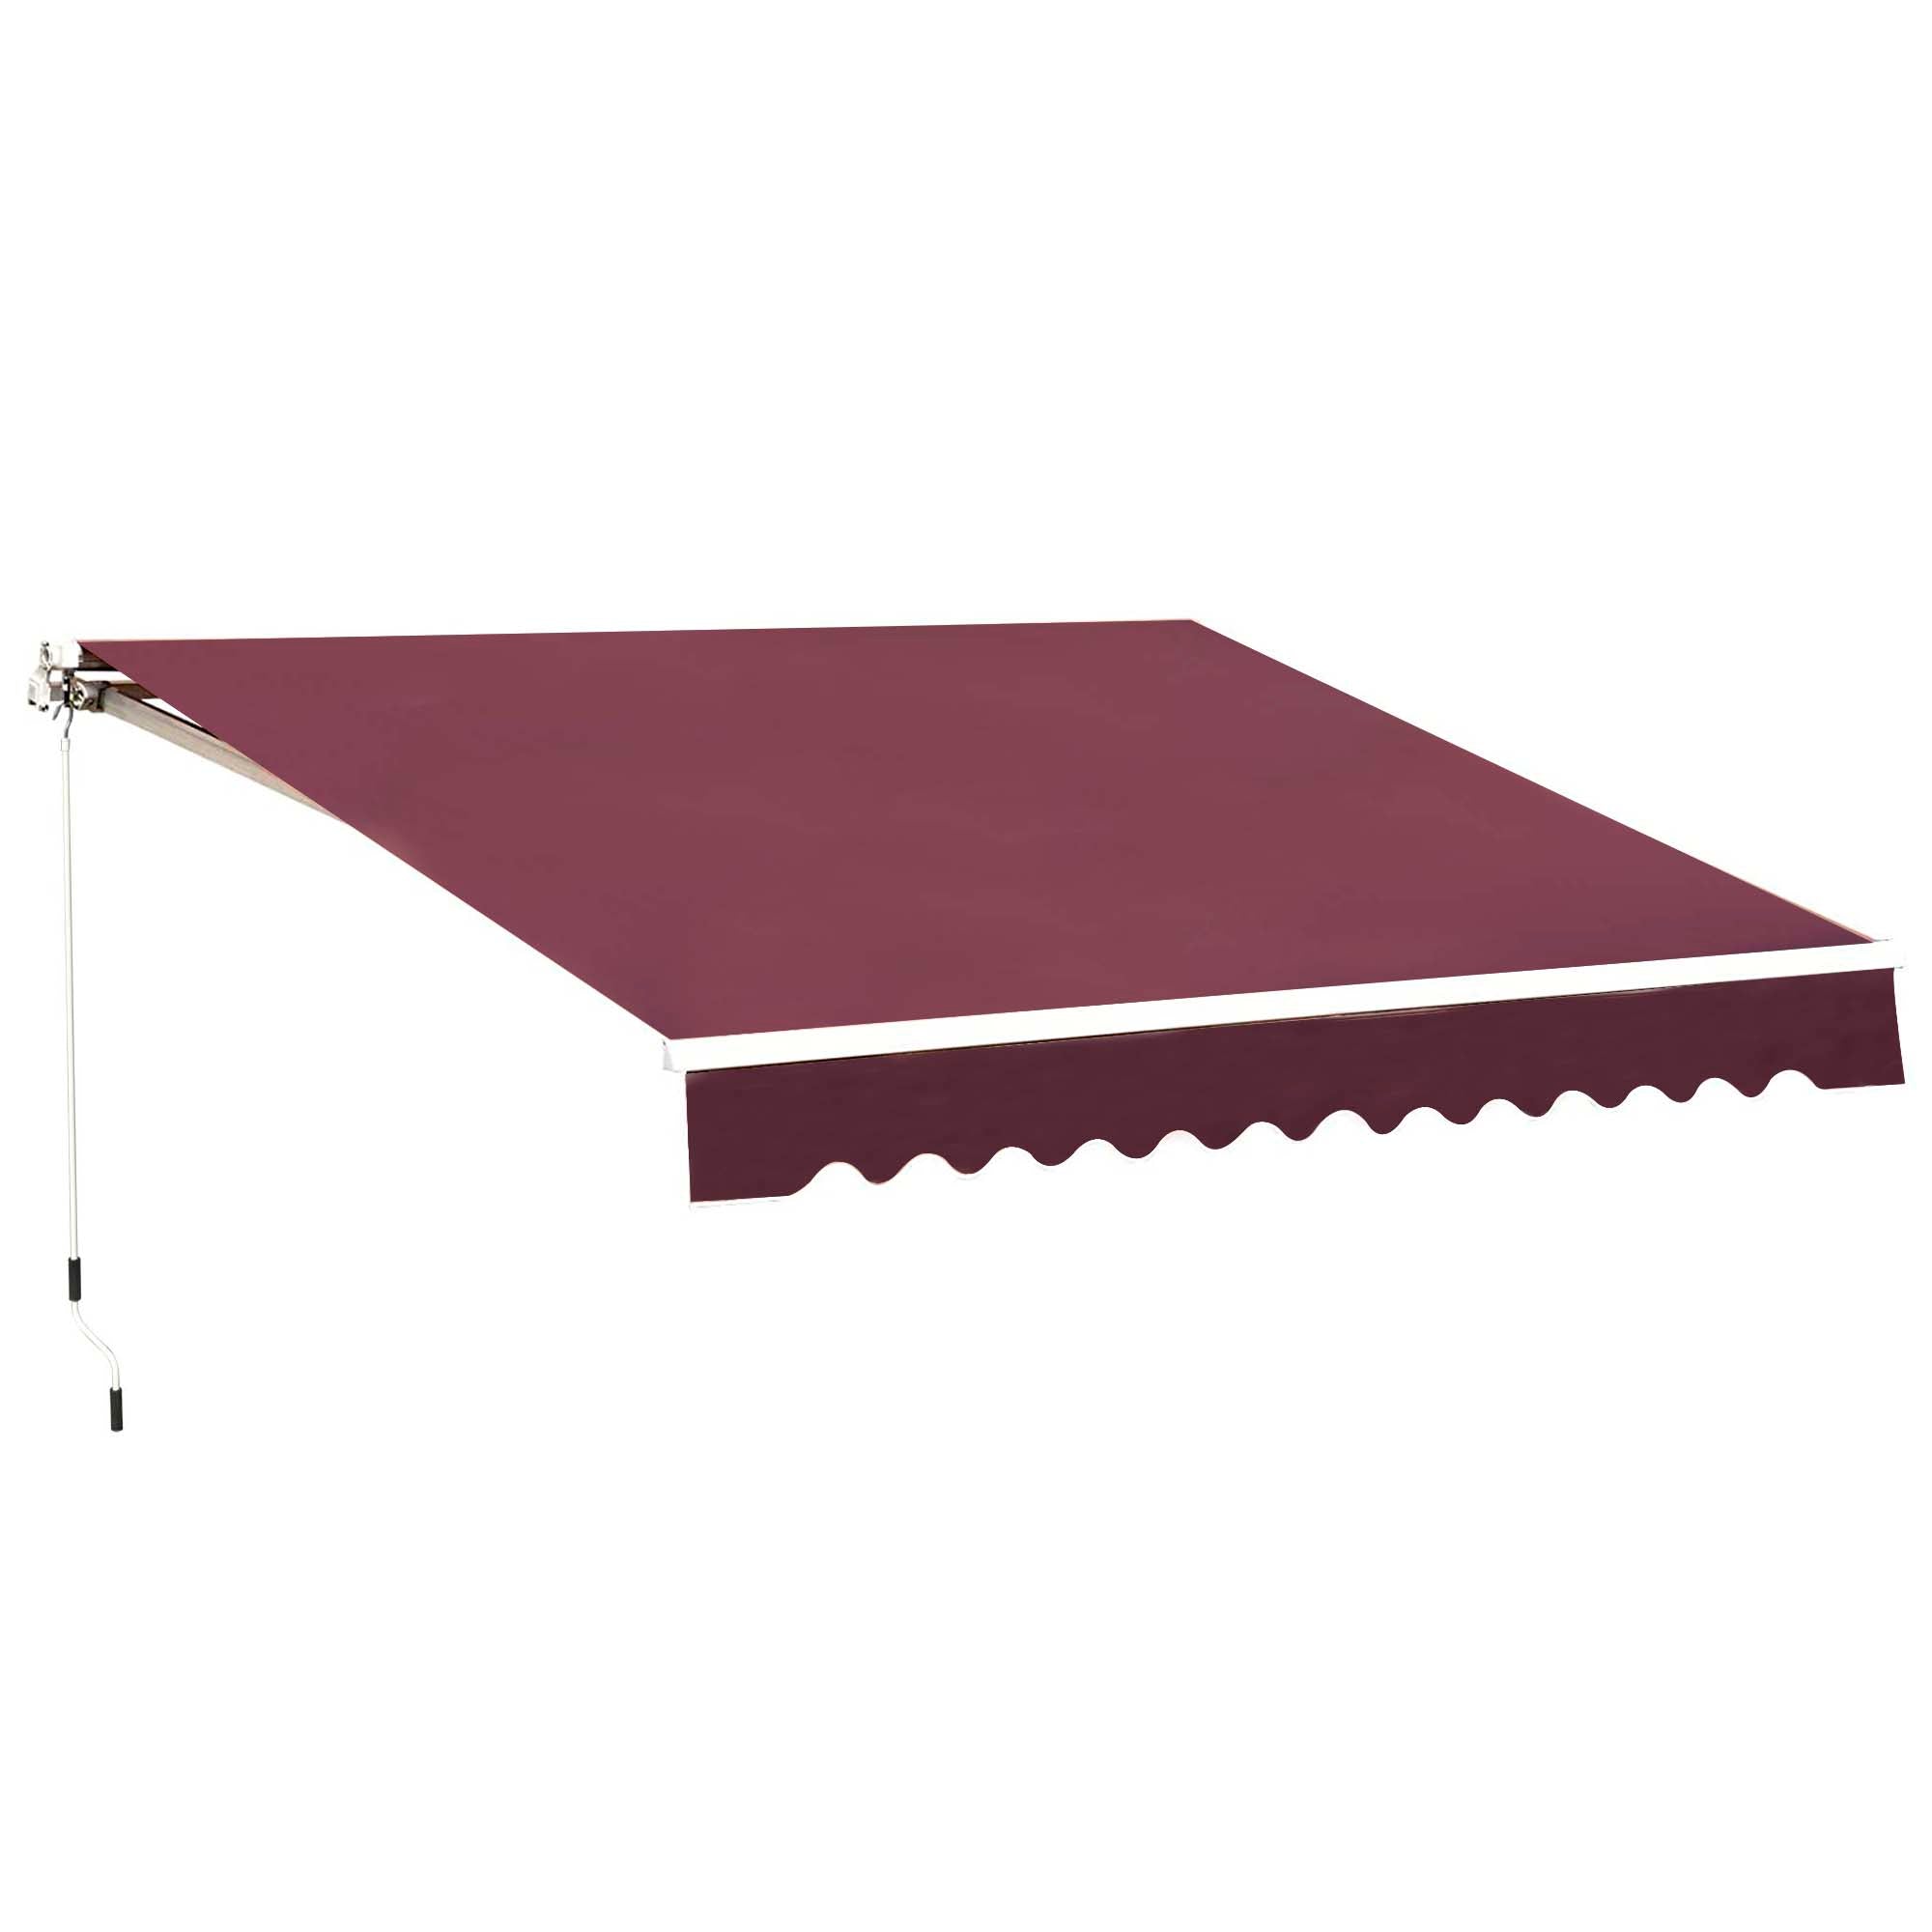 Outsunny Garden Sun Shade Canopy Retractable Awning - 3 x 2.5m - Wine Red  | TJ Hughes